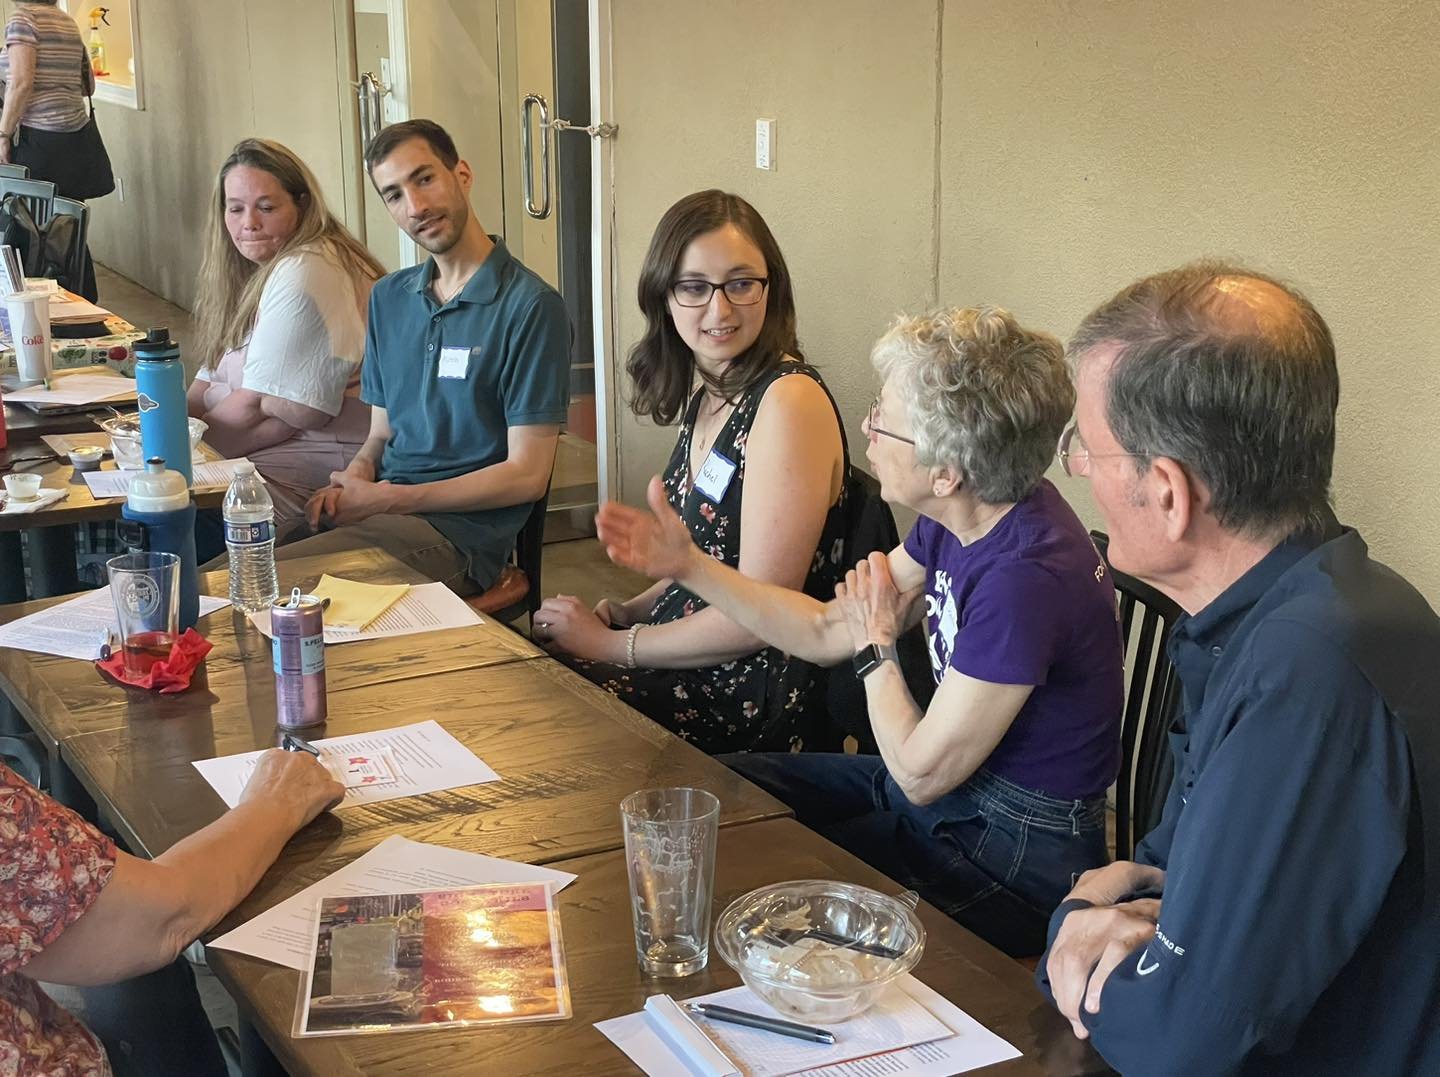 Last week, we held our first-ever &ldquo;Elevator Pitch&rdquo; training for volunteers! Board President Edie Burkey offered coaching on how talk about our growing co-op with attendees at community events - or just your own friends and family! 

Openi